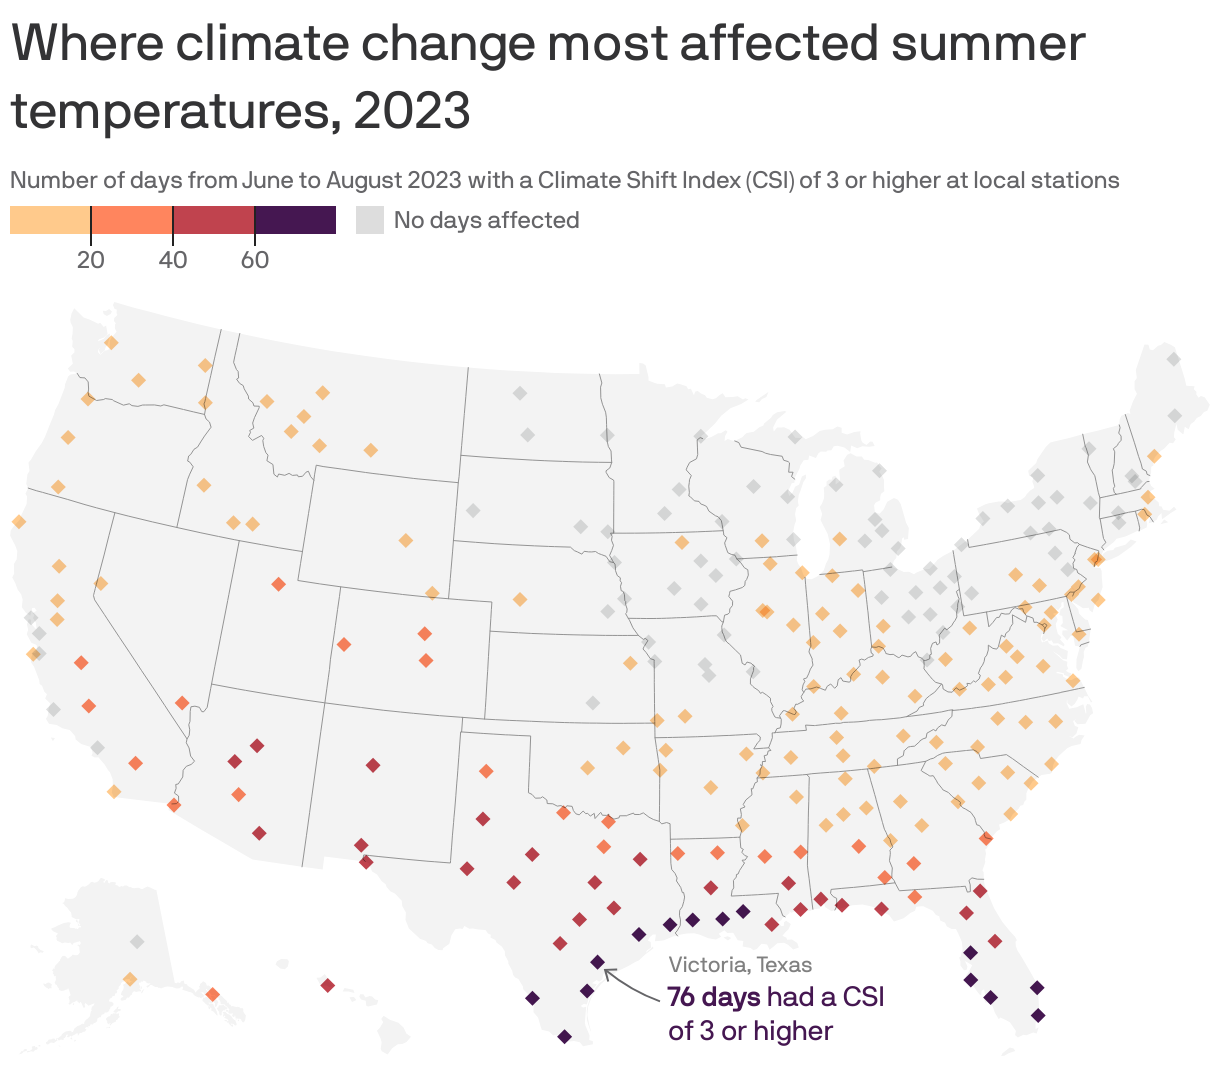 Where climate change most affected summer temperatures, 2023